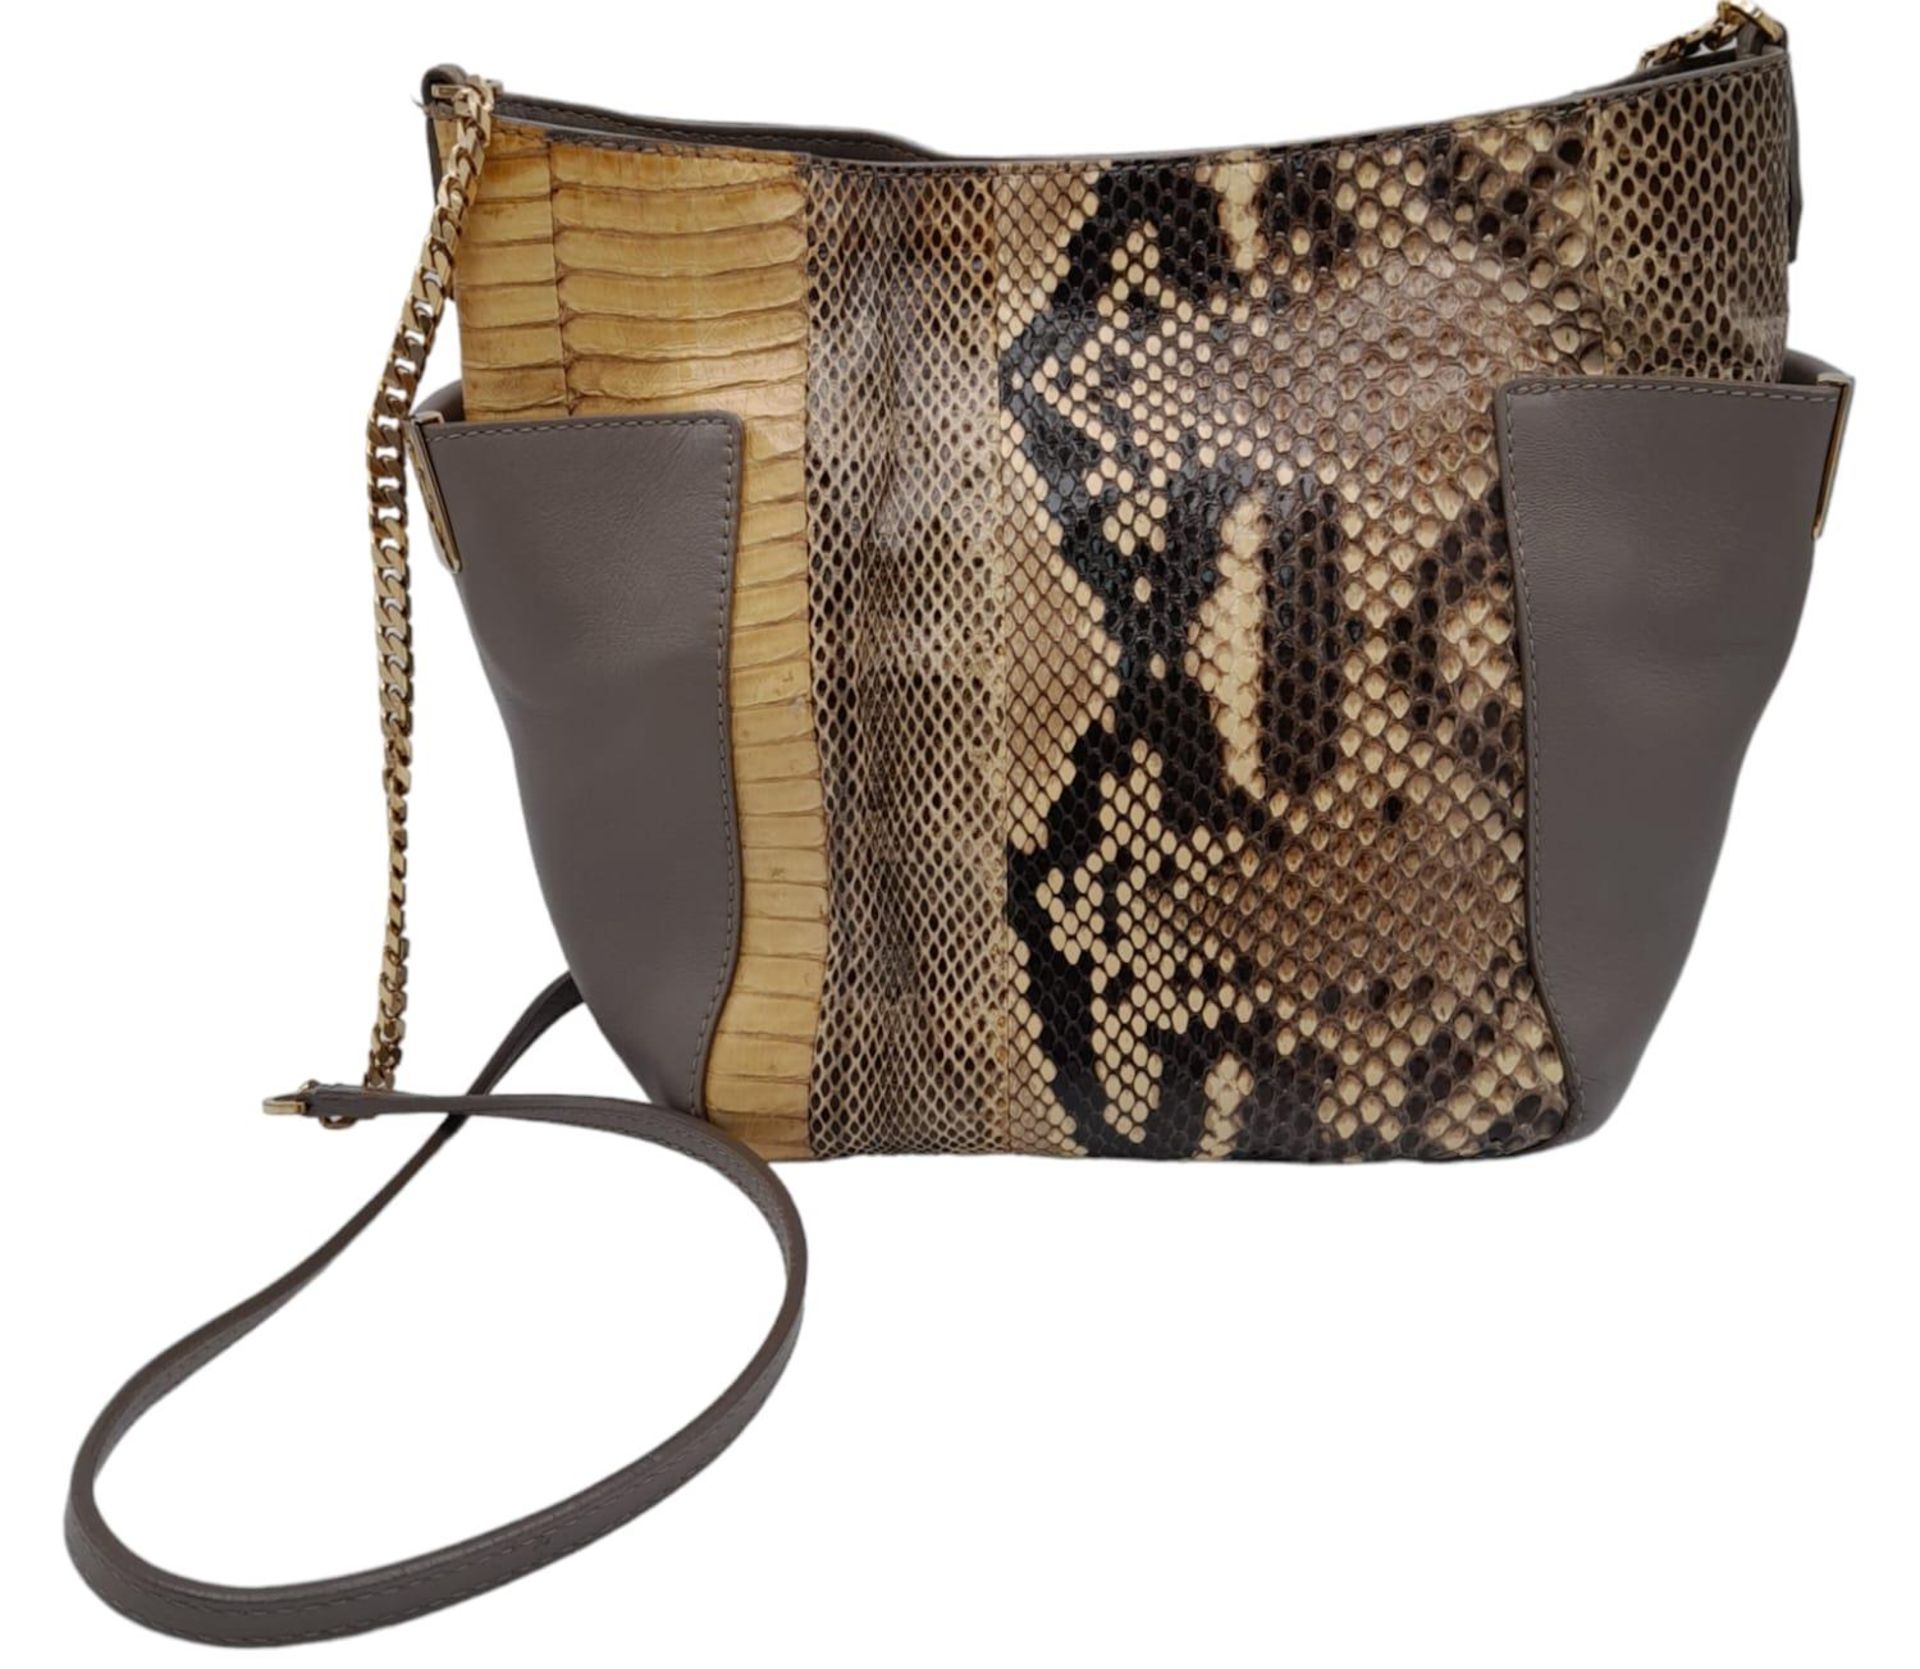 A Jimmy Choo Taupe Snakeskin Crossbody Bag. Snakeskin and leather exterior with gold-toned hardware,